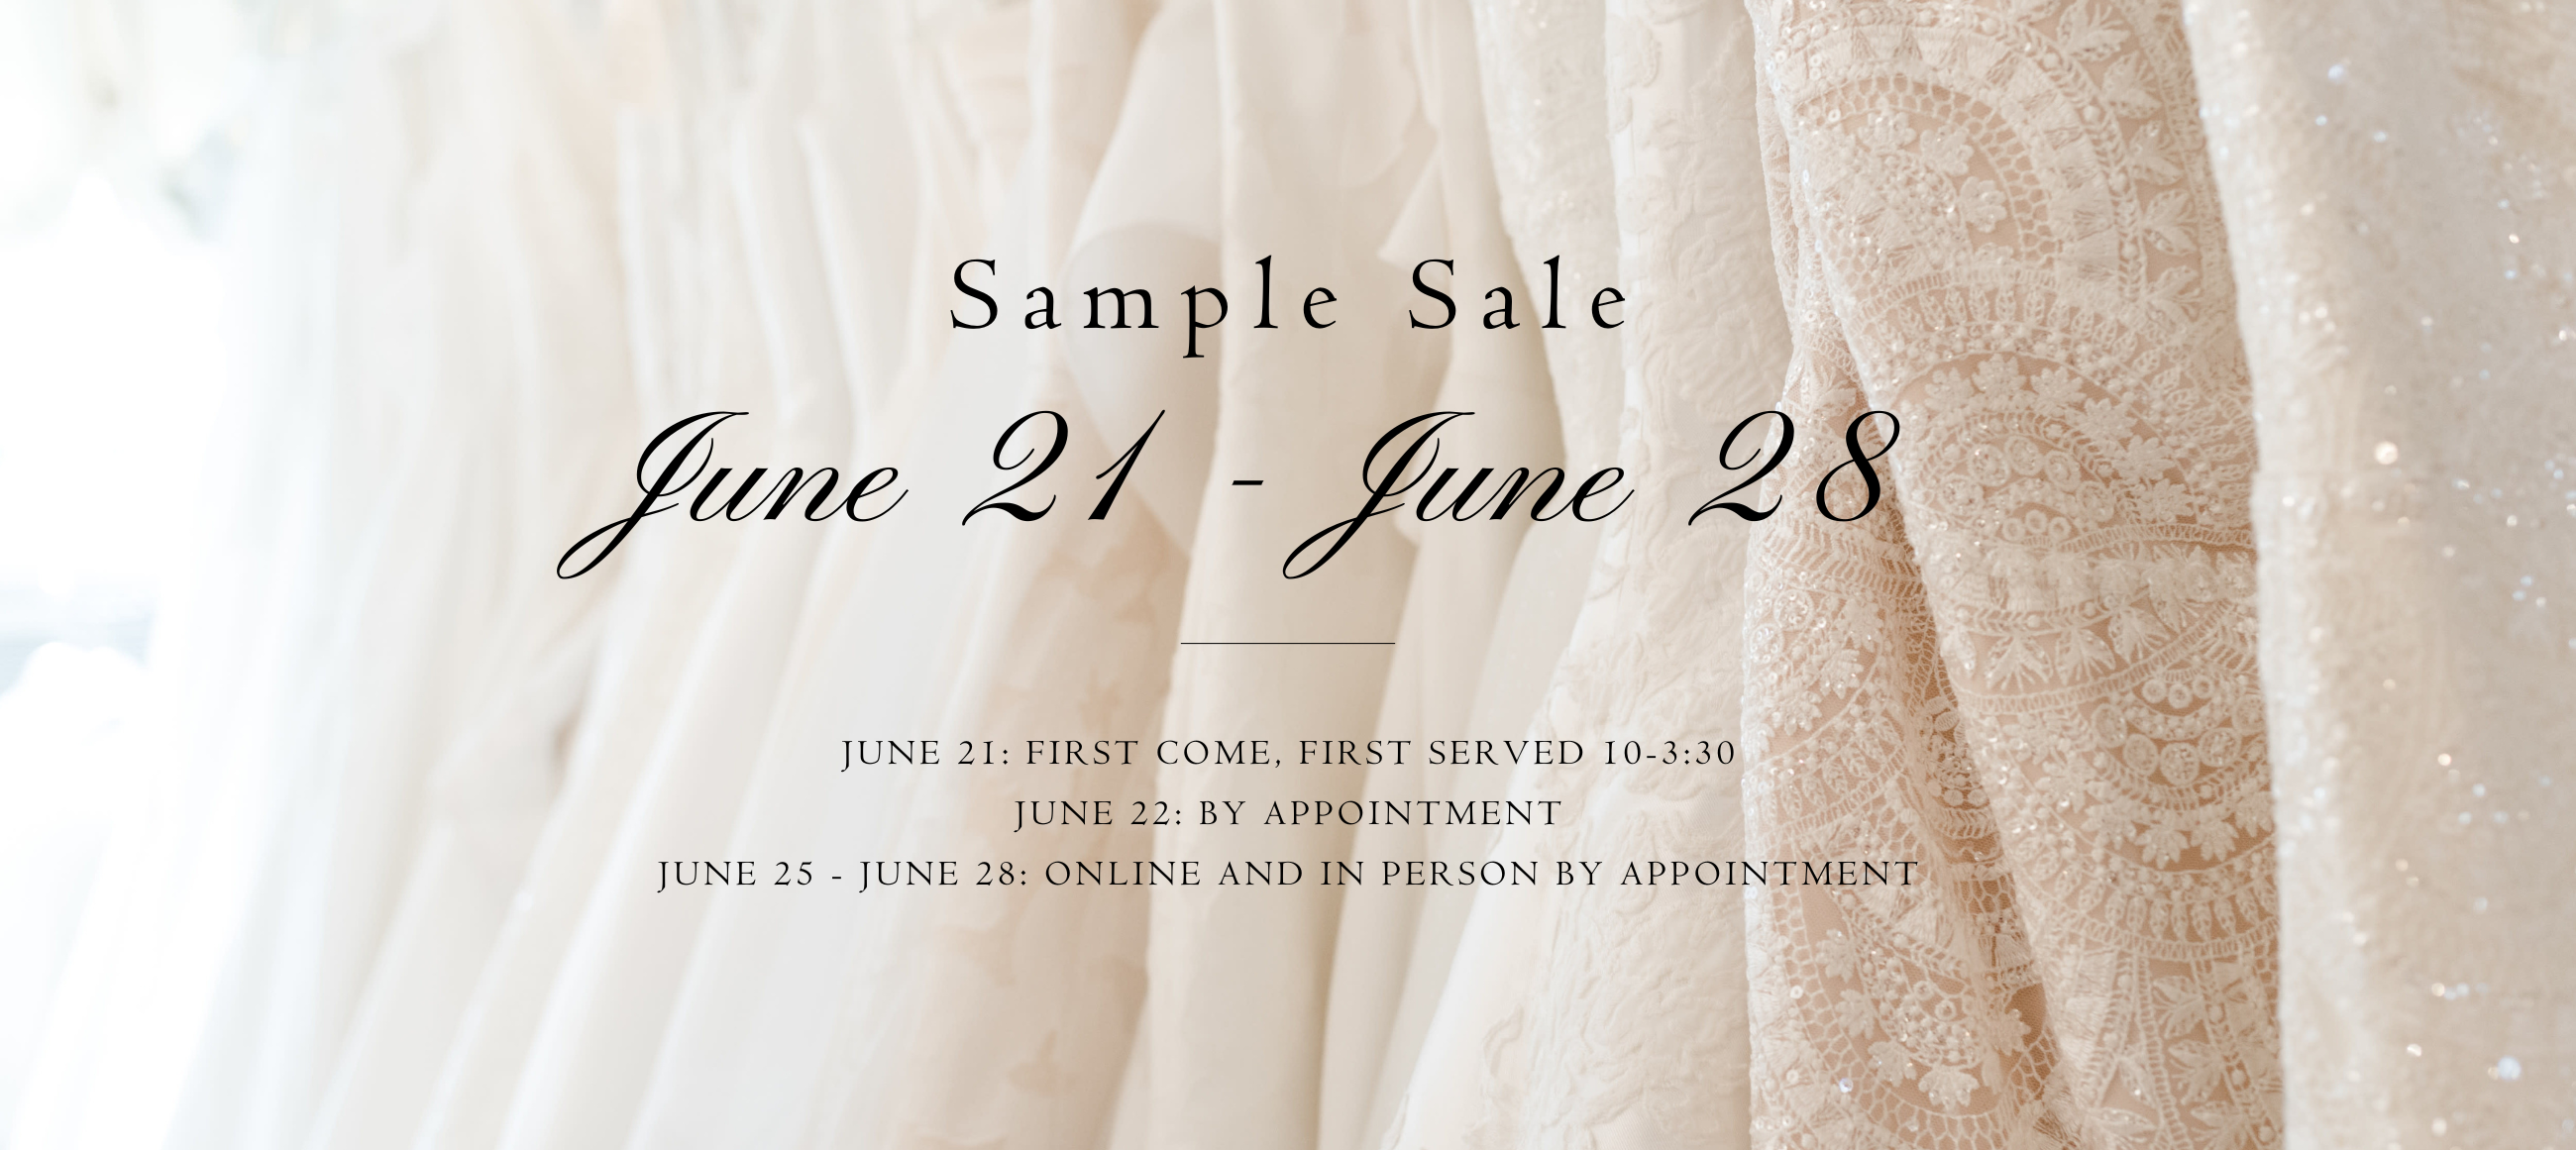 Little White Dress Sale Event at The White Dress by the shore